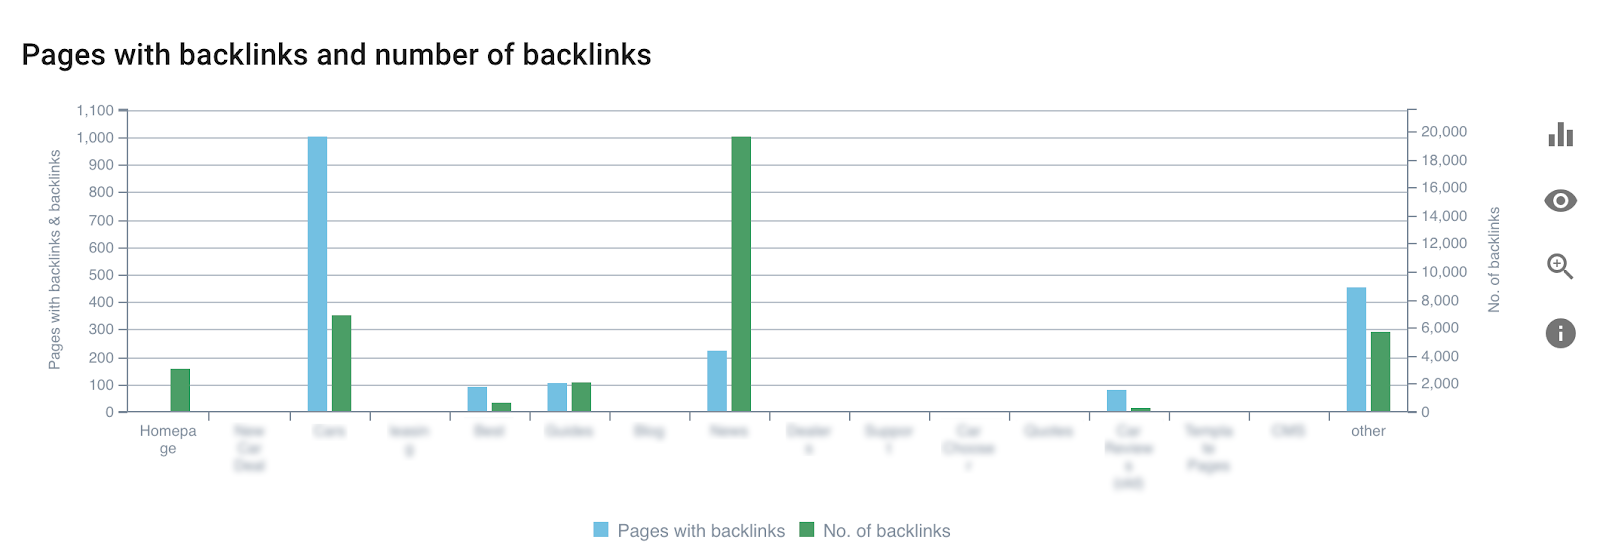 pages with backlink and number of backlinks